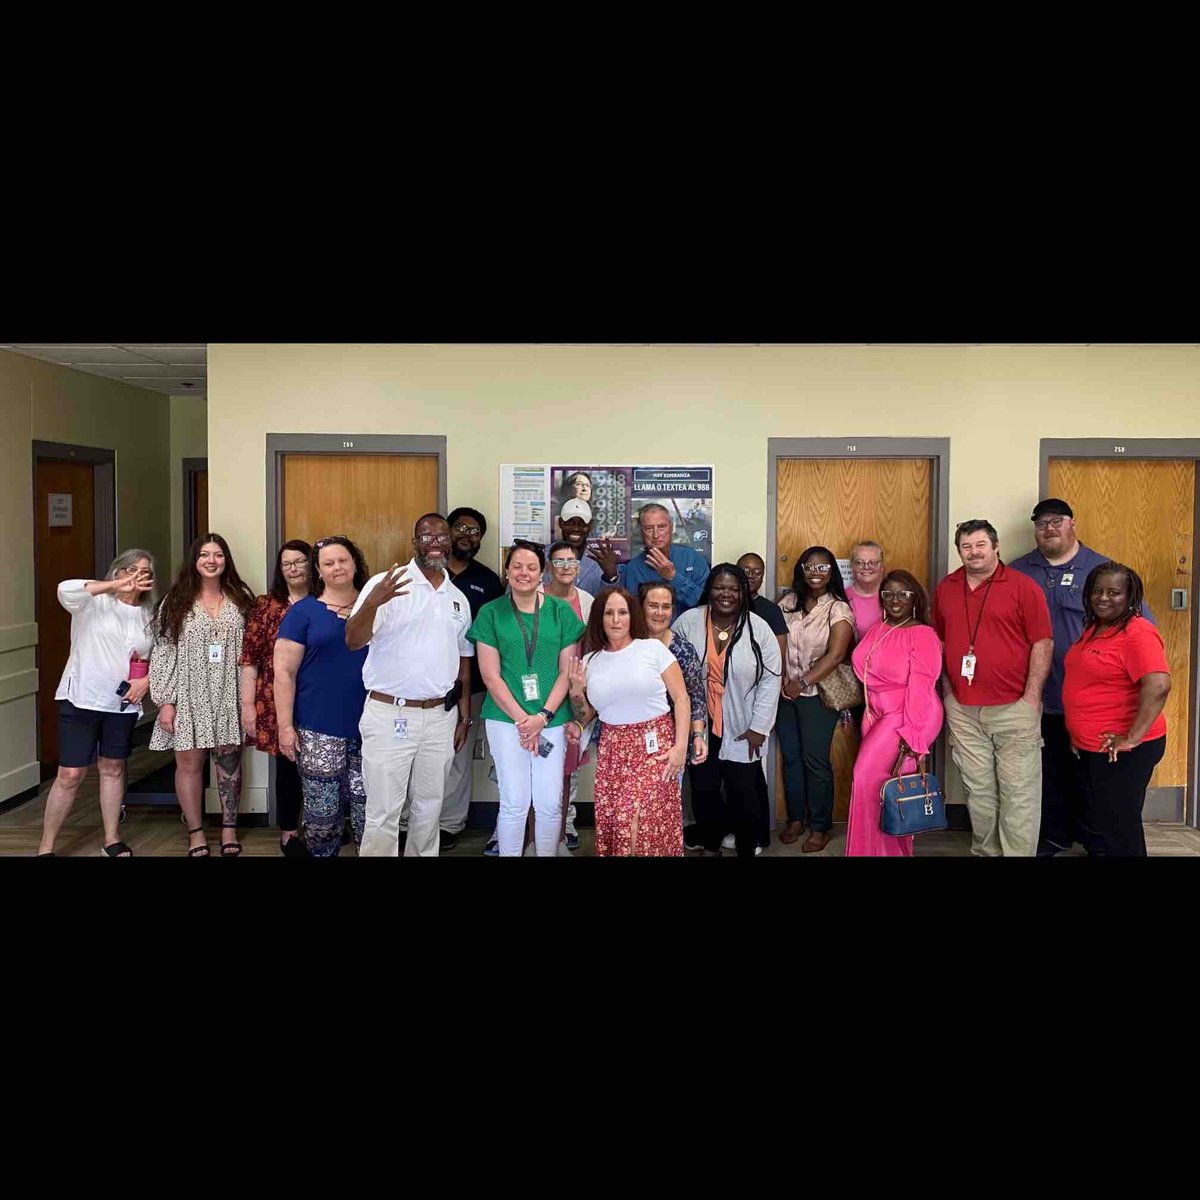 Georgia Pines & DBHDD Region 4 Office met with Ladji Ruffin, Forensic Peer Mentor Trainer/Liaison; to provide information on the role of a Certified Peer Specialist (CPS) and how to become one! Great work Region 4!!! Keep making a difference within the community!! #BeDBHDD